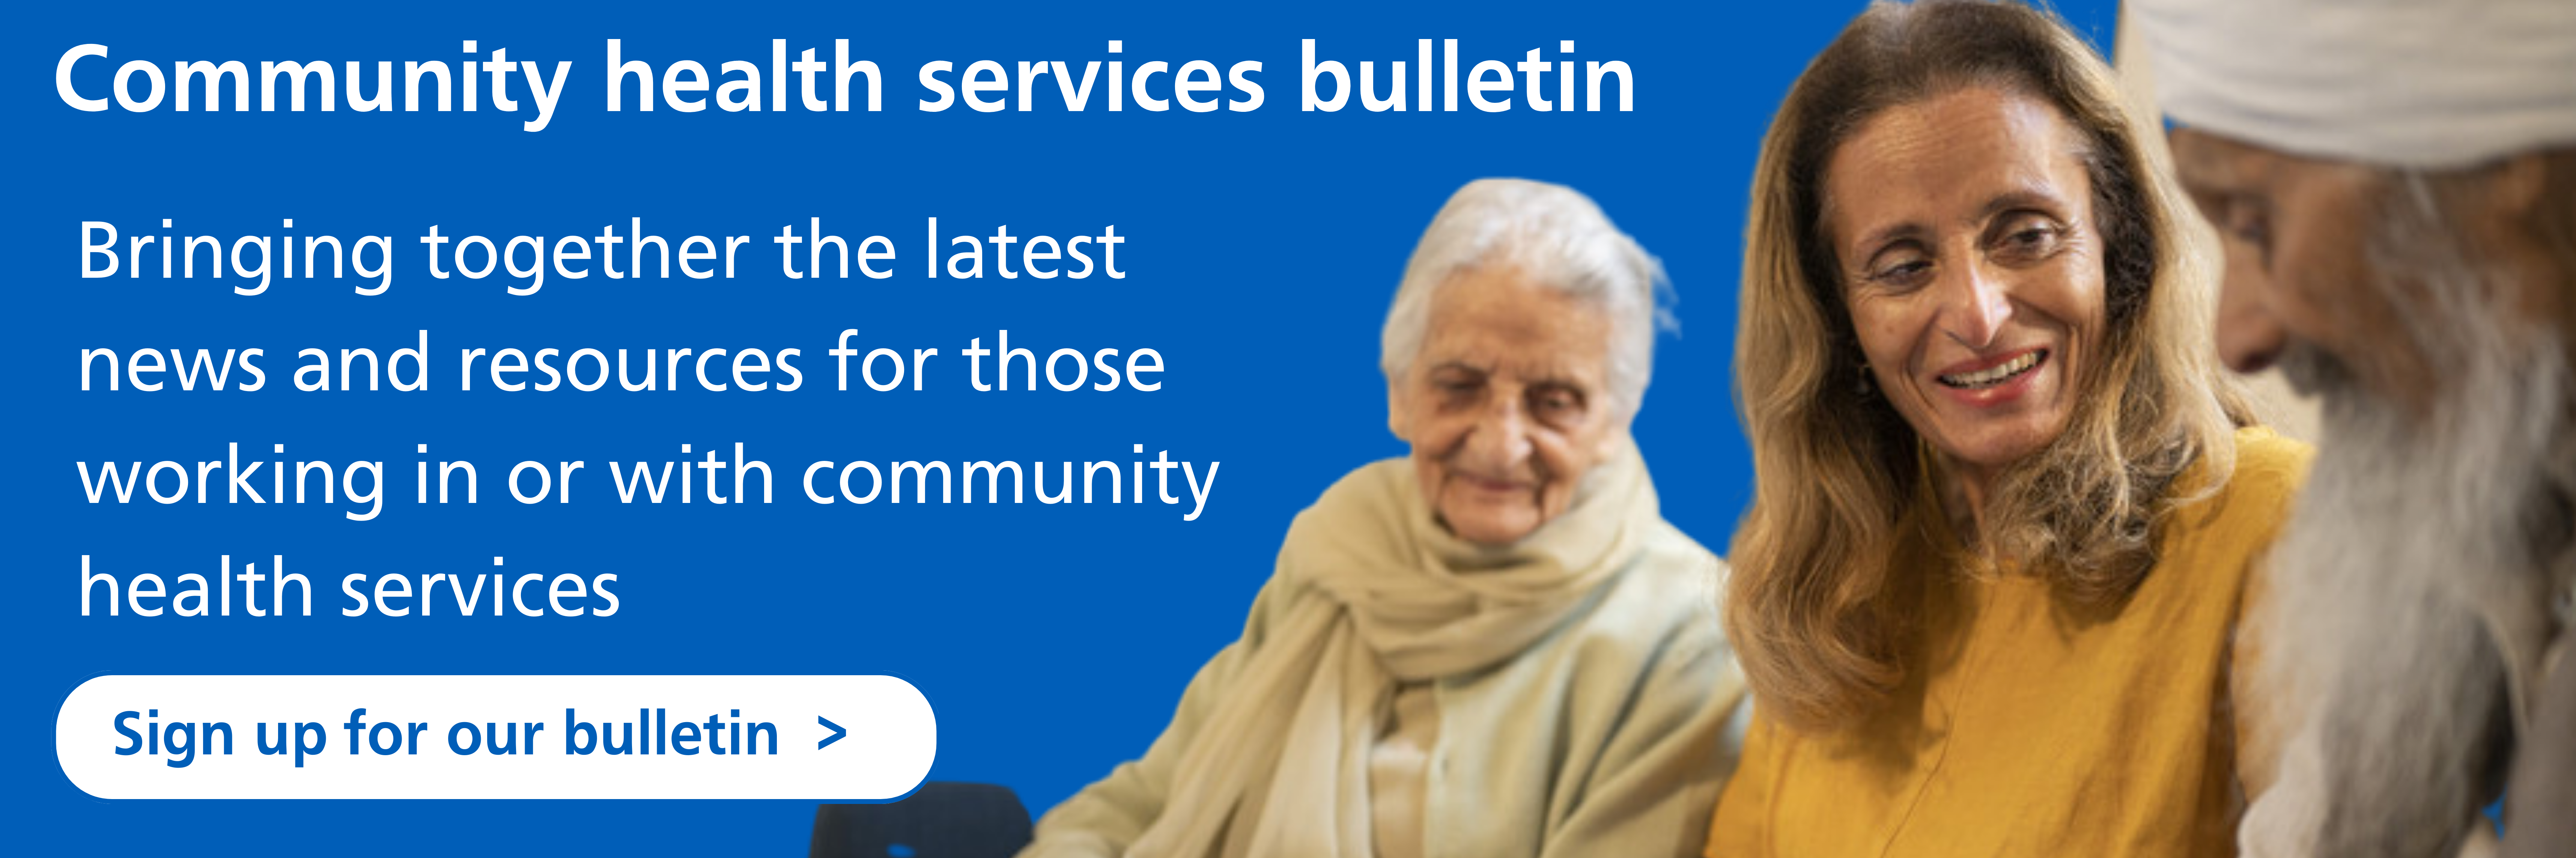 Community health service bulletin banner with link to sign up page https://www.england.nhs.uk/email-bulletins/community-health-services-bulletin/